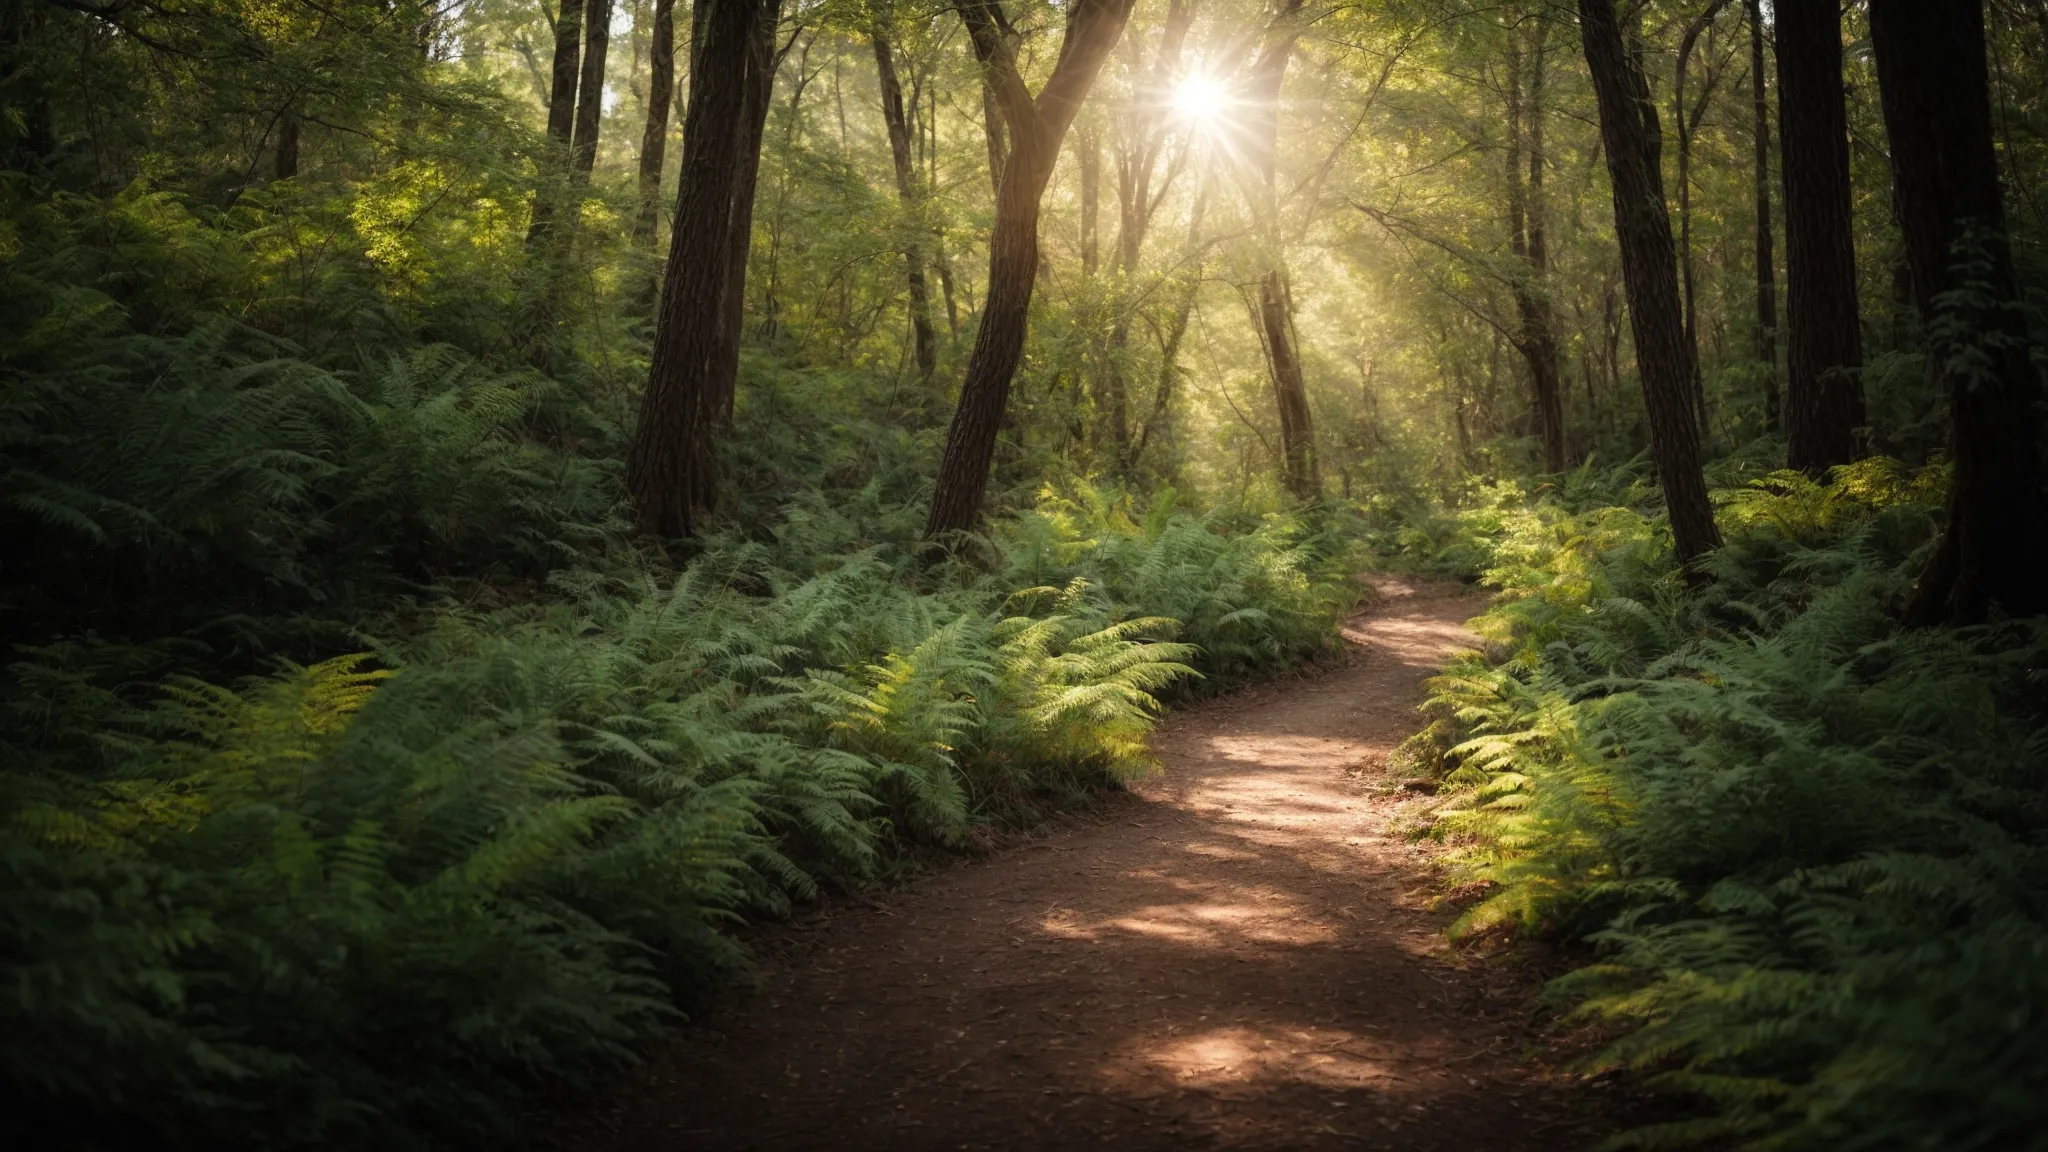 a winding path through a dense forest opening up into a sunlit clearing.